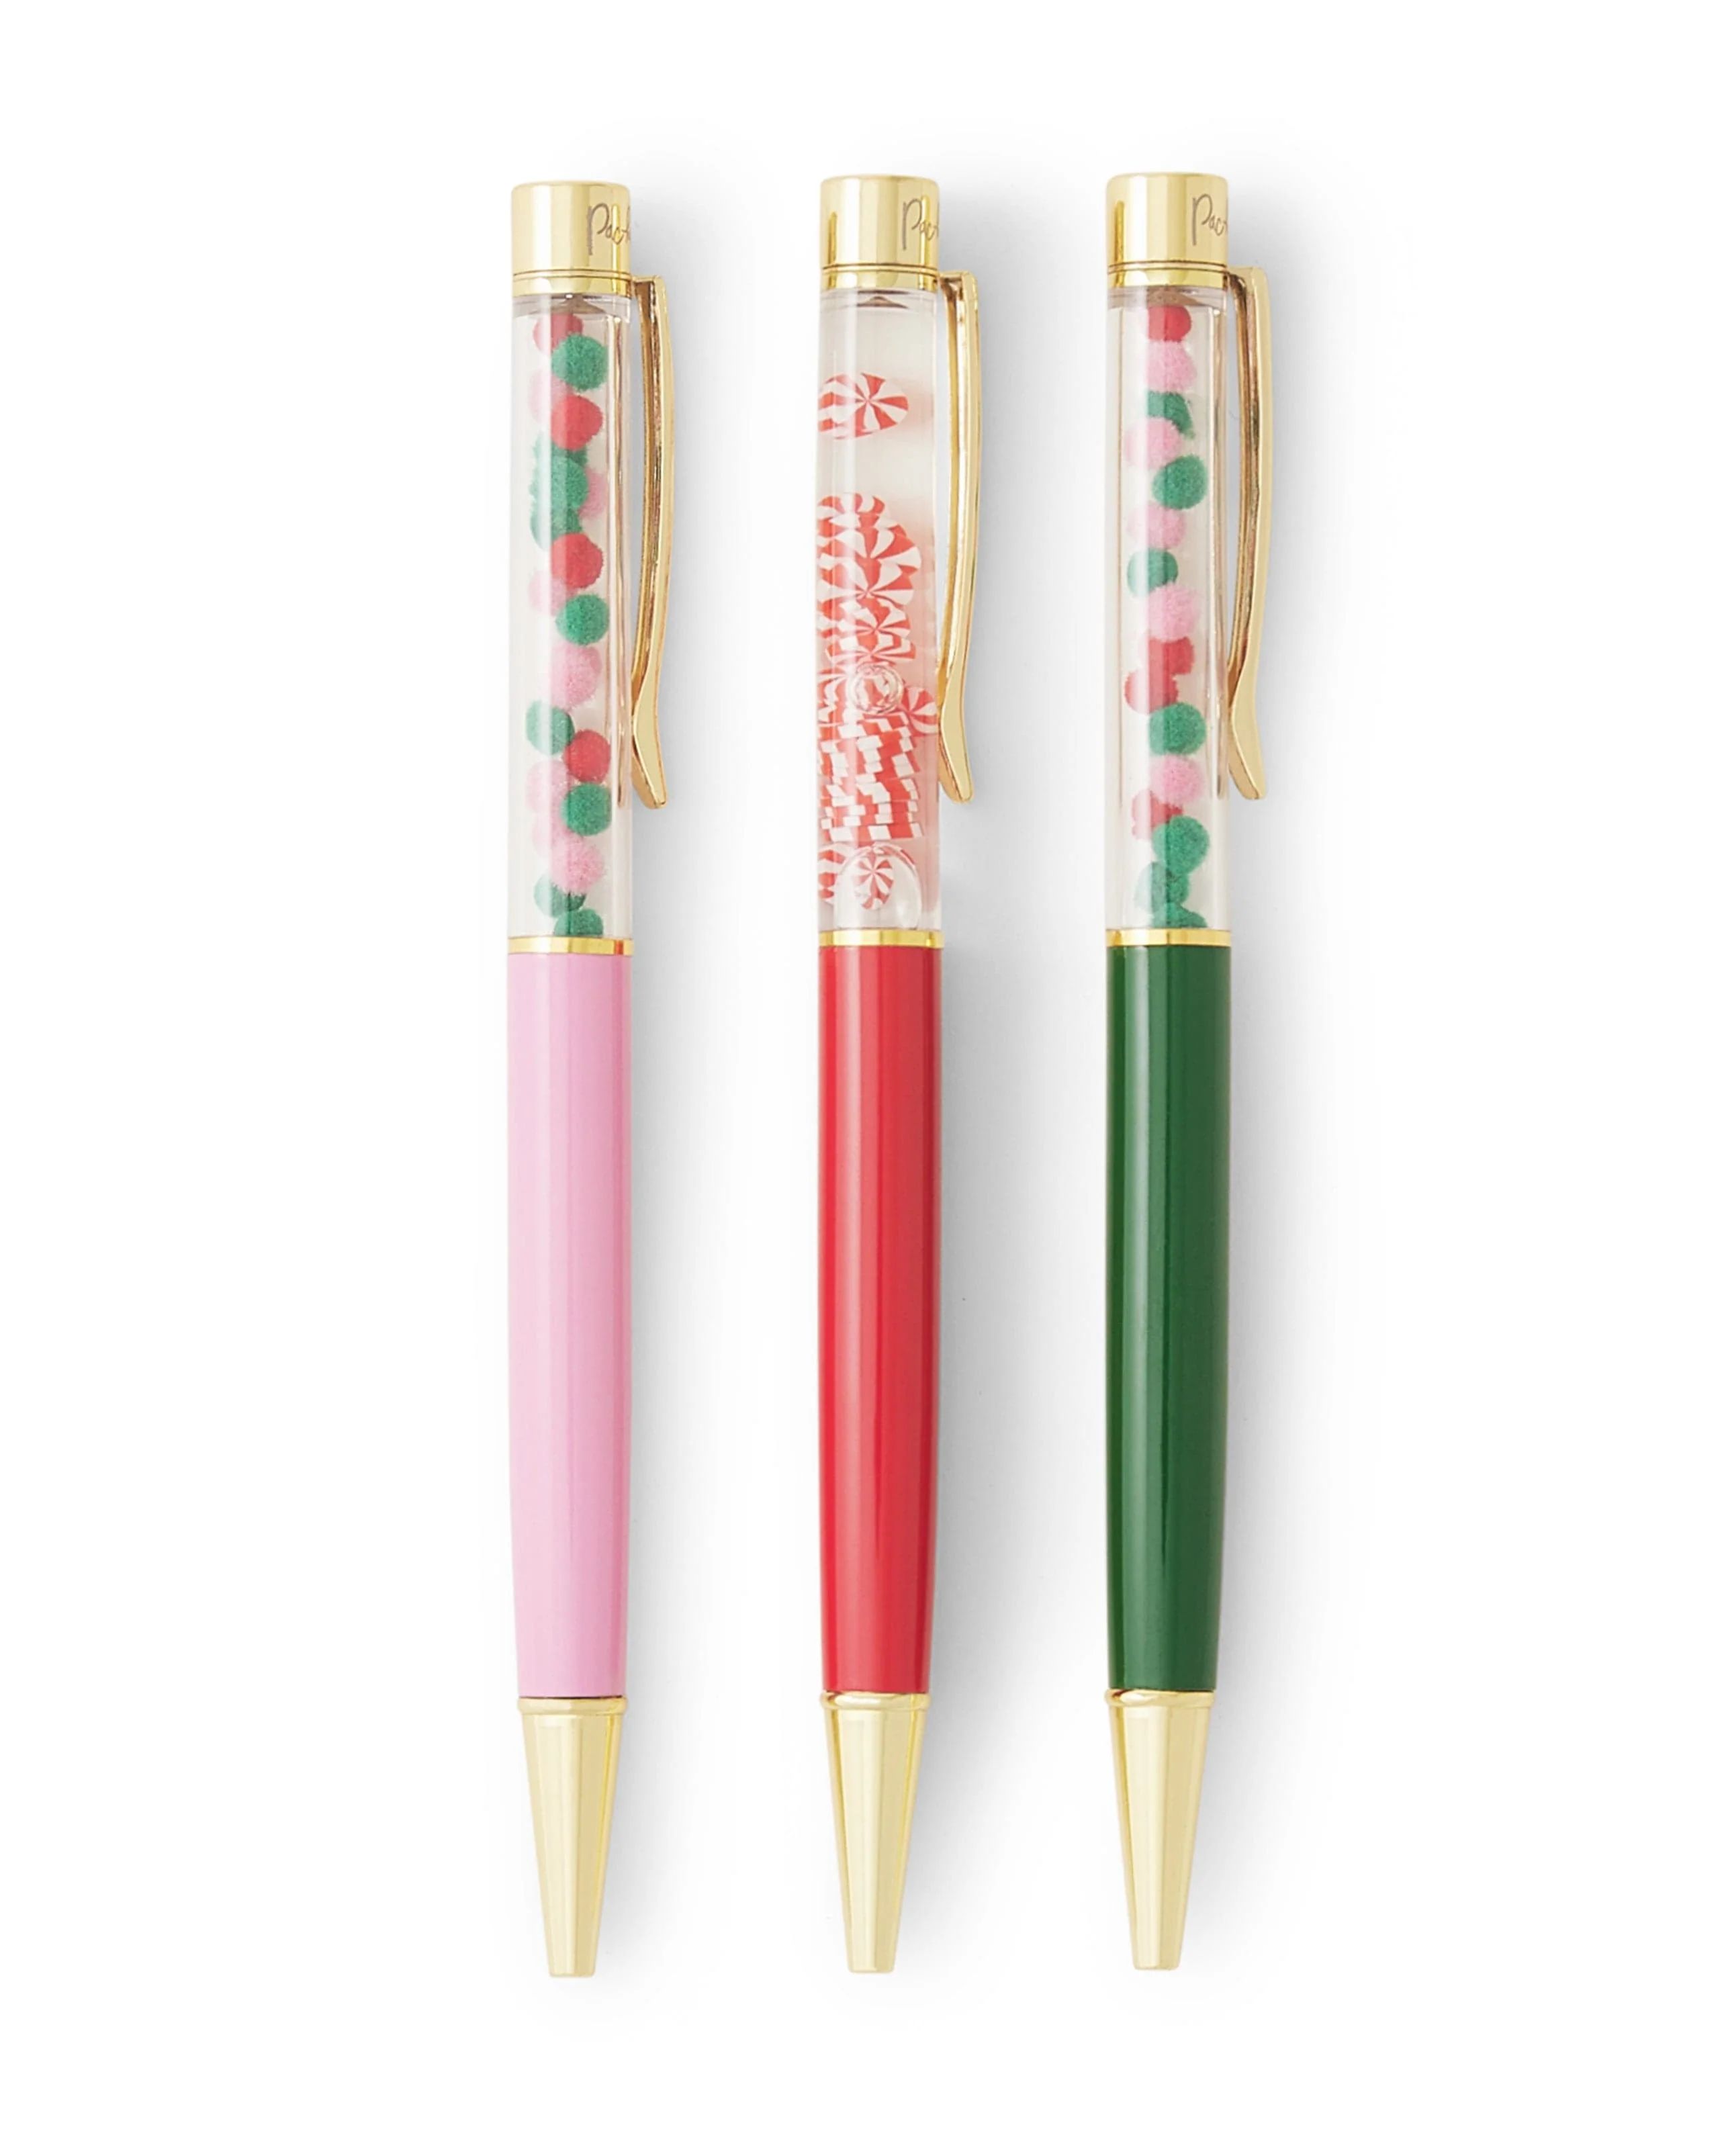 Letters to Santa Confetti Pen Set- Black Ink | Packed Party